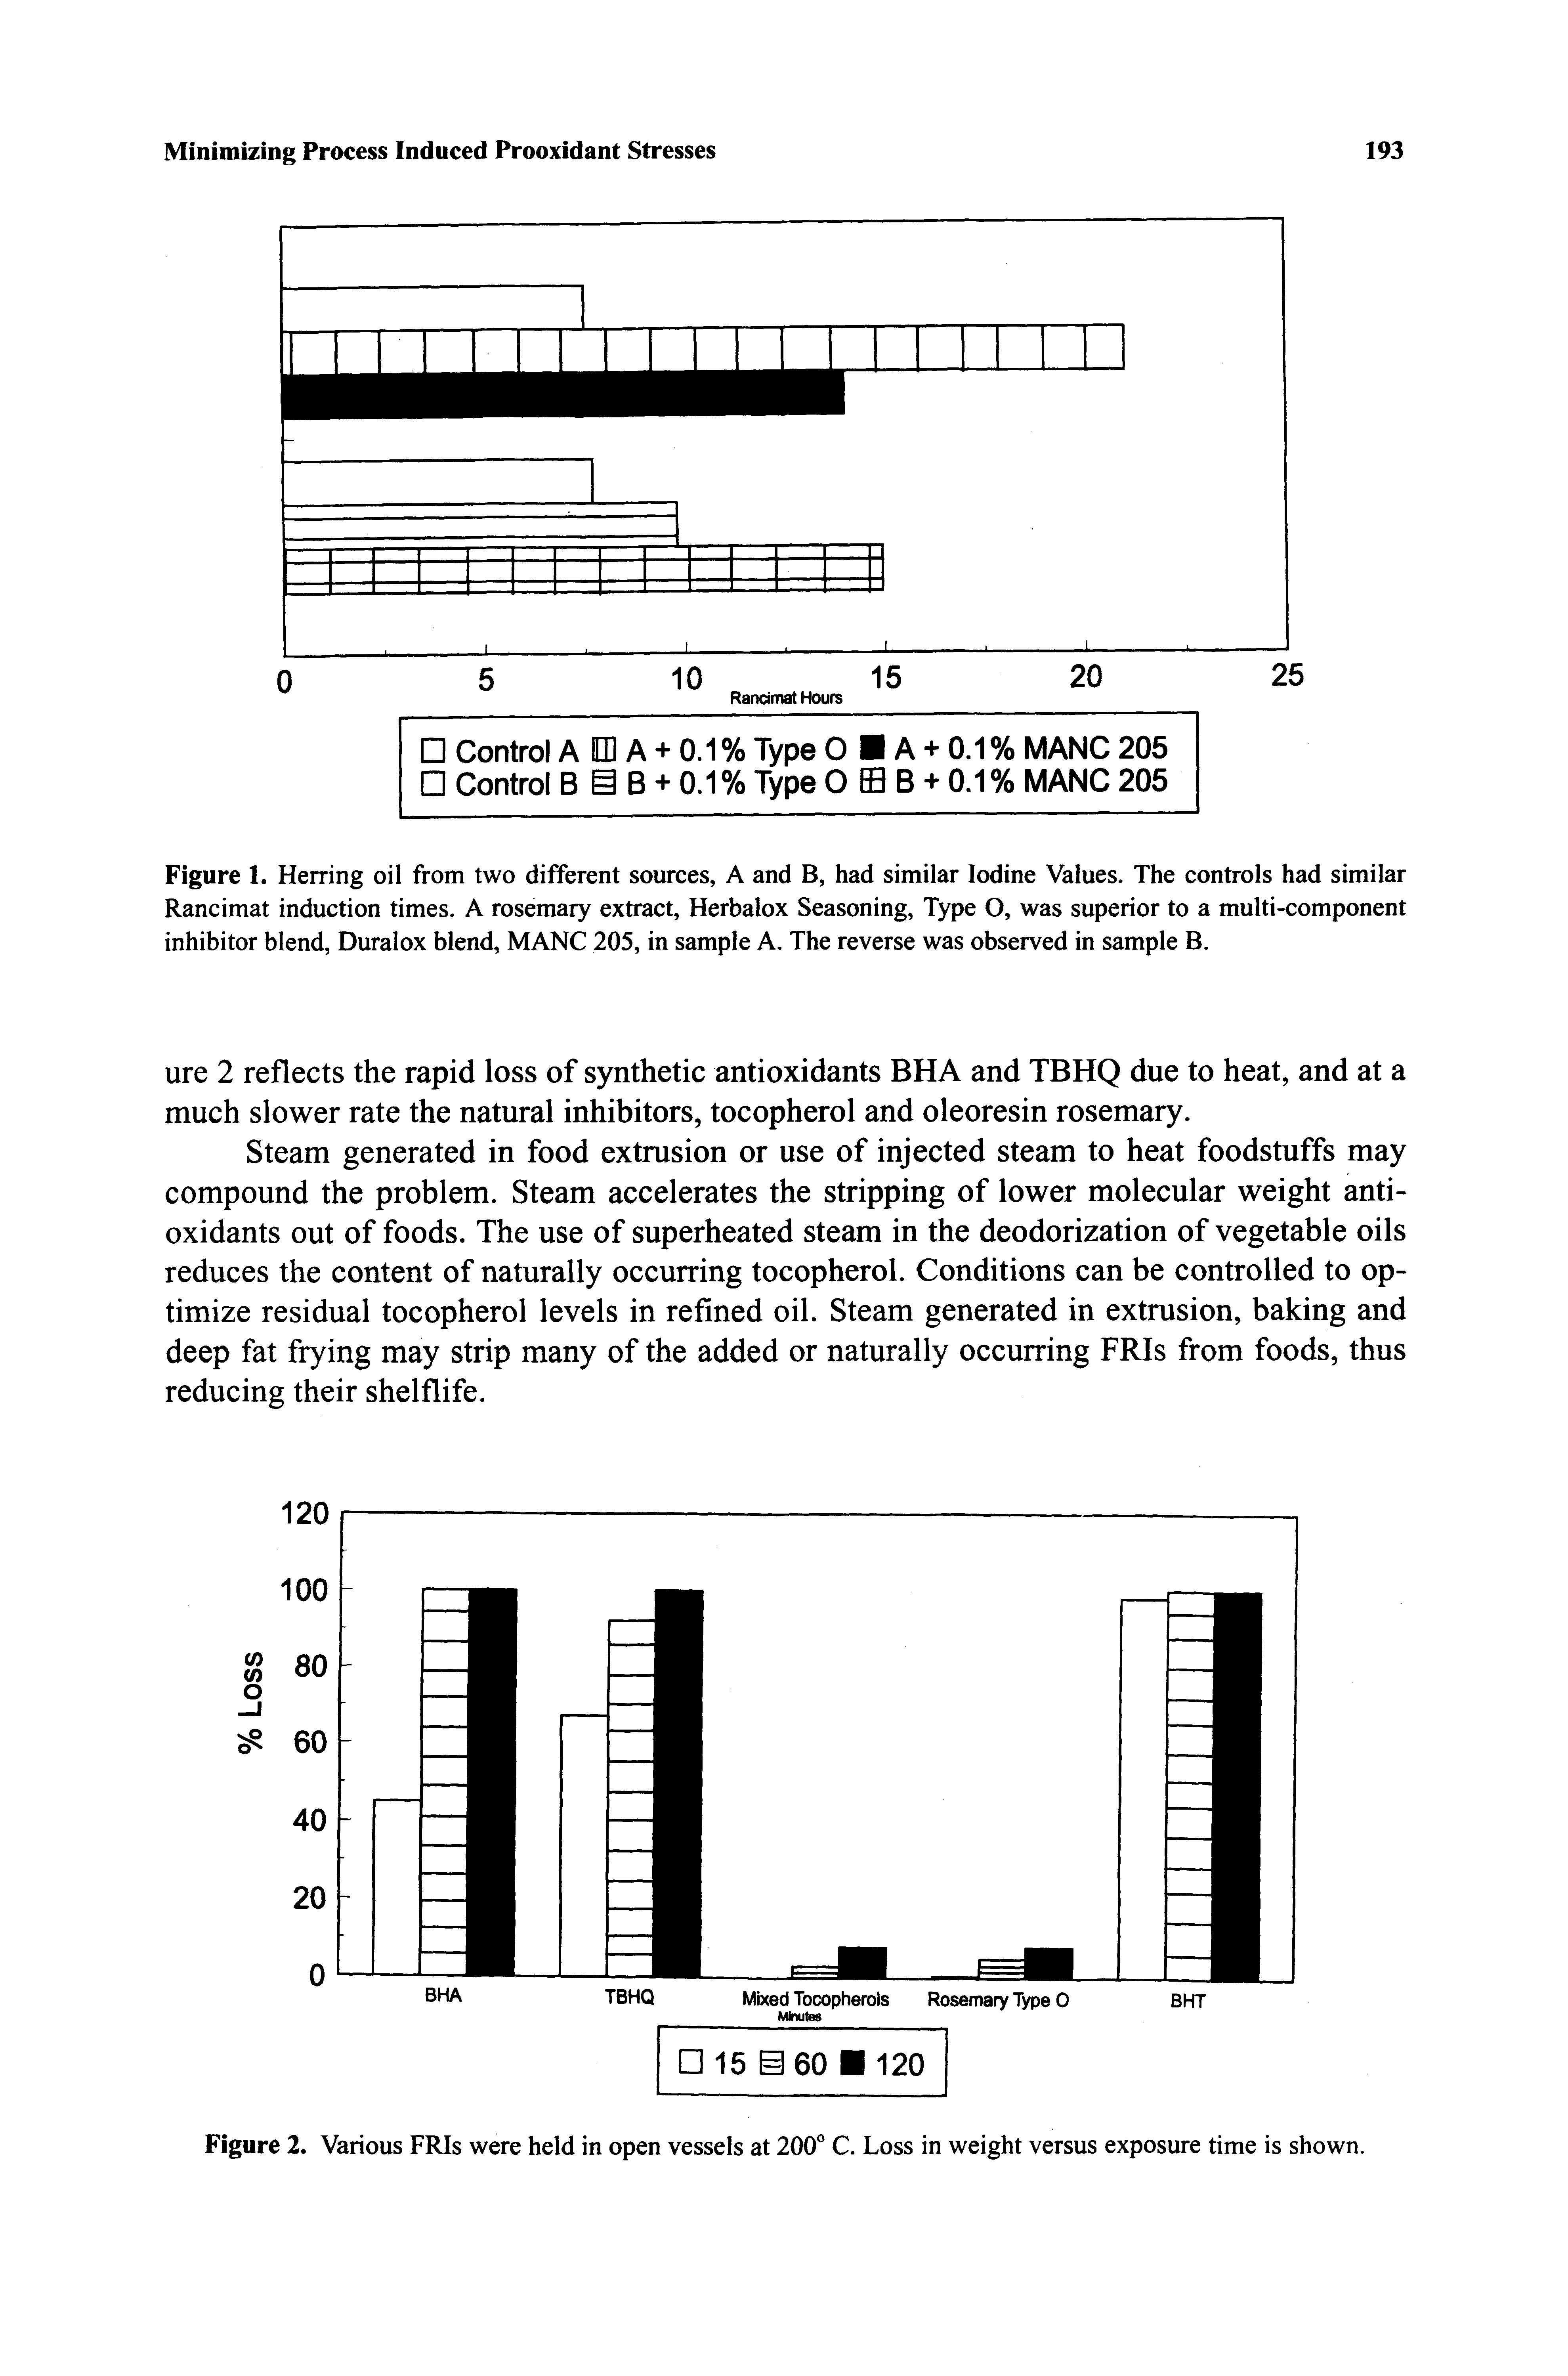 Figure 1. Herring oil from two different sources, A and B, had similar Iodine Values. The controls had similar Rancimat induction times. A rosemary extract, Herbalox Seasoning, Type O, was superior to a multi-component inhibitor blend, Duralox blend, MANC 205, in sample A. The reverse was observed in sample B.